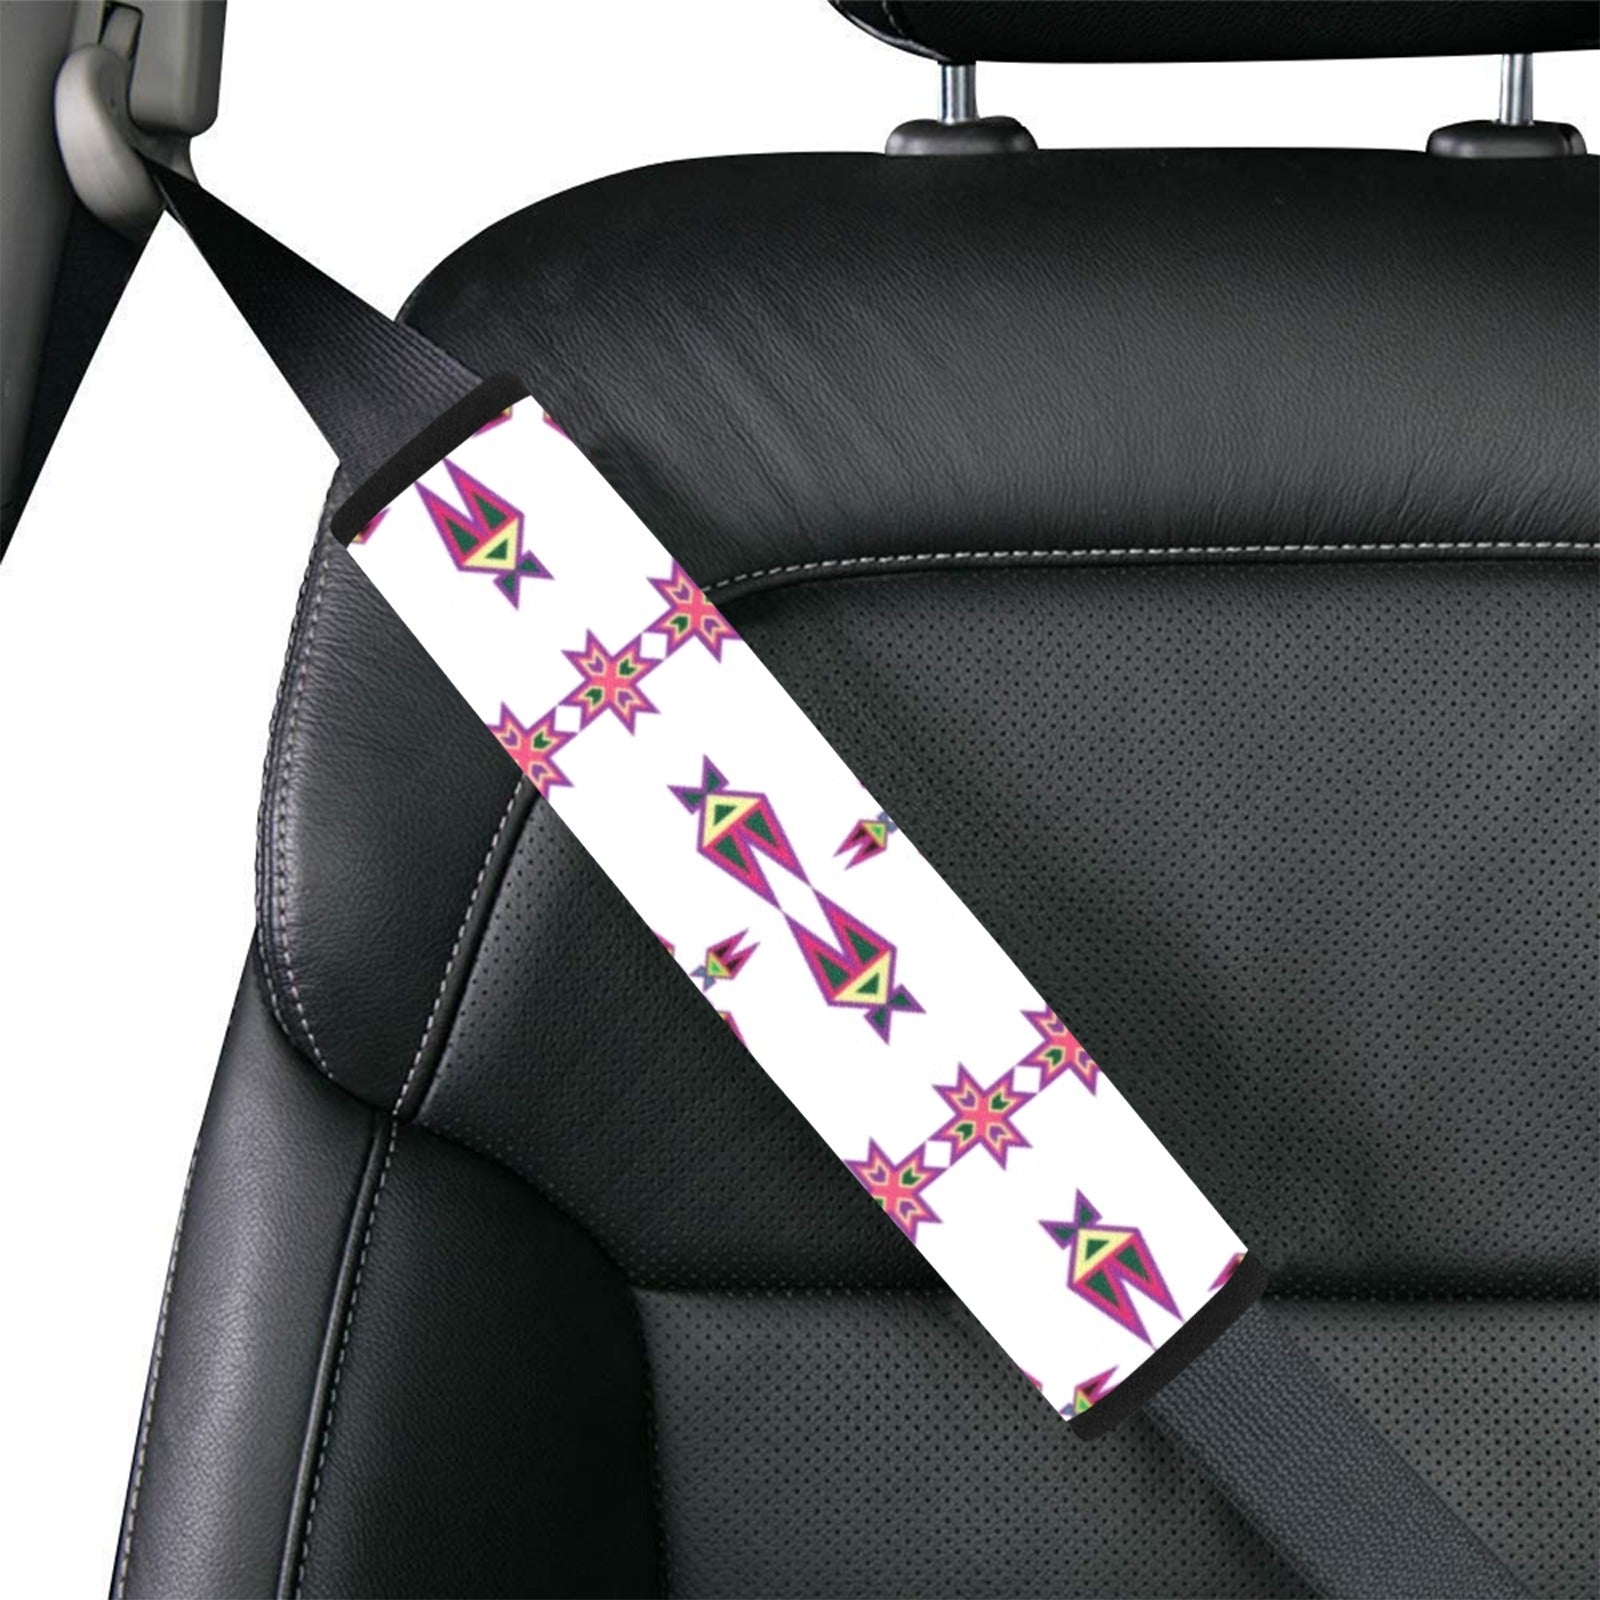 Four Directions Lodge Flurry Car Seat Belt Cover 7''x12.6'' (Pack of 2)